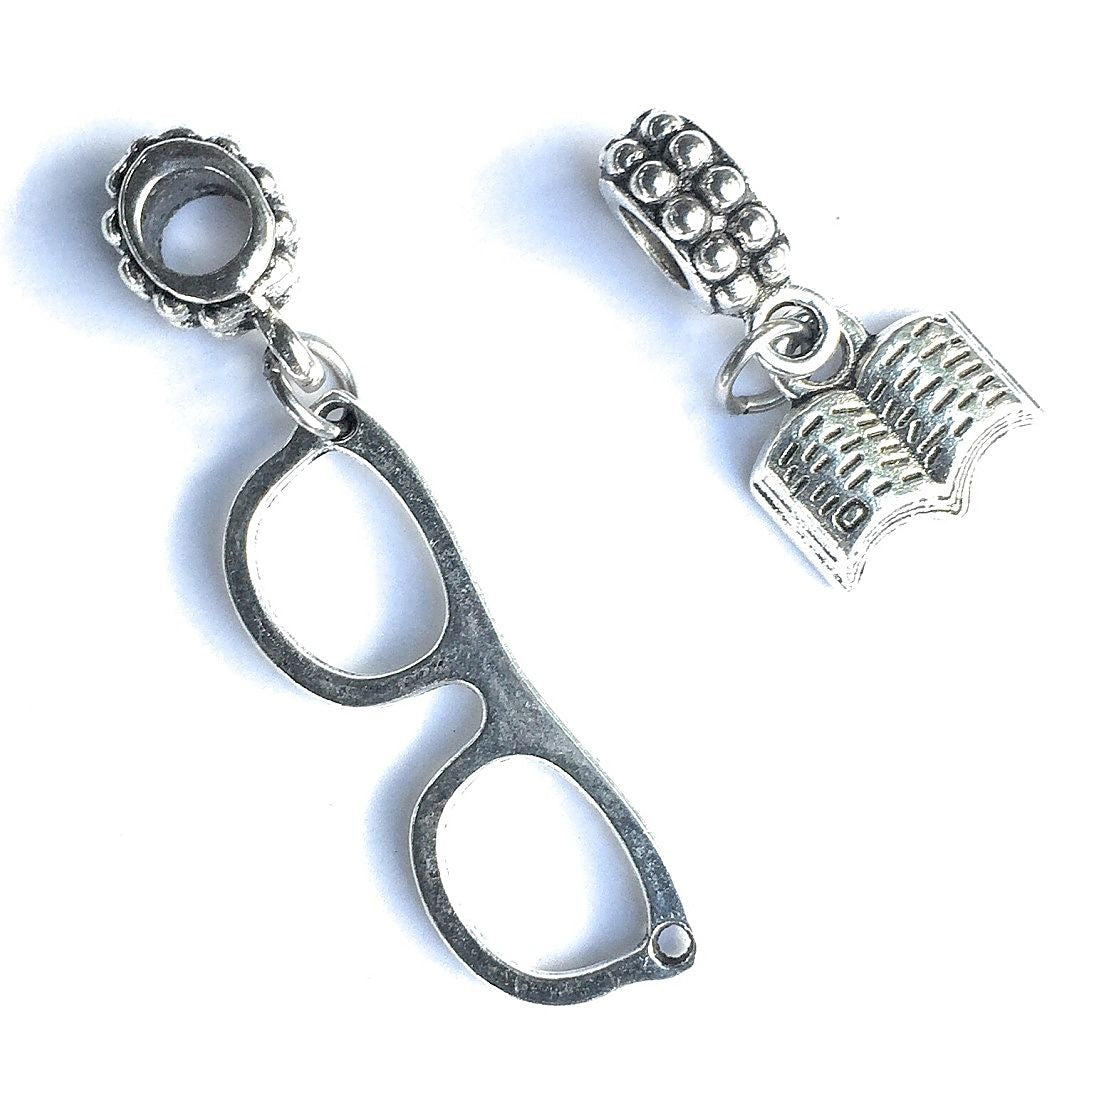 Bracelet Charms : Eyeglasses and Open Book Charms.